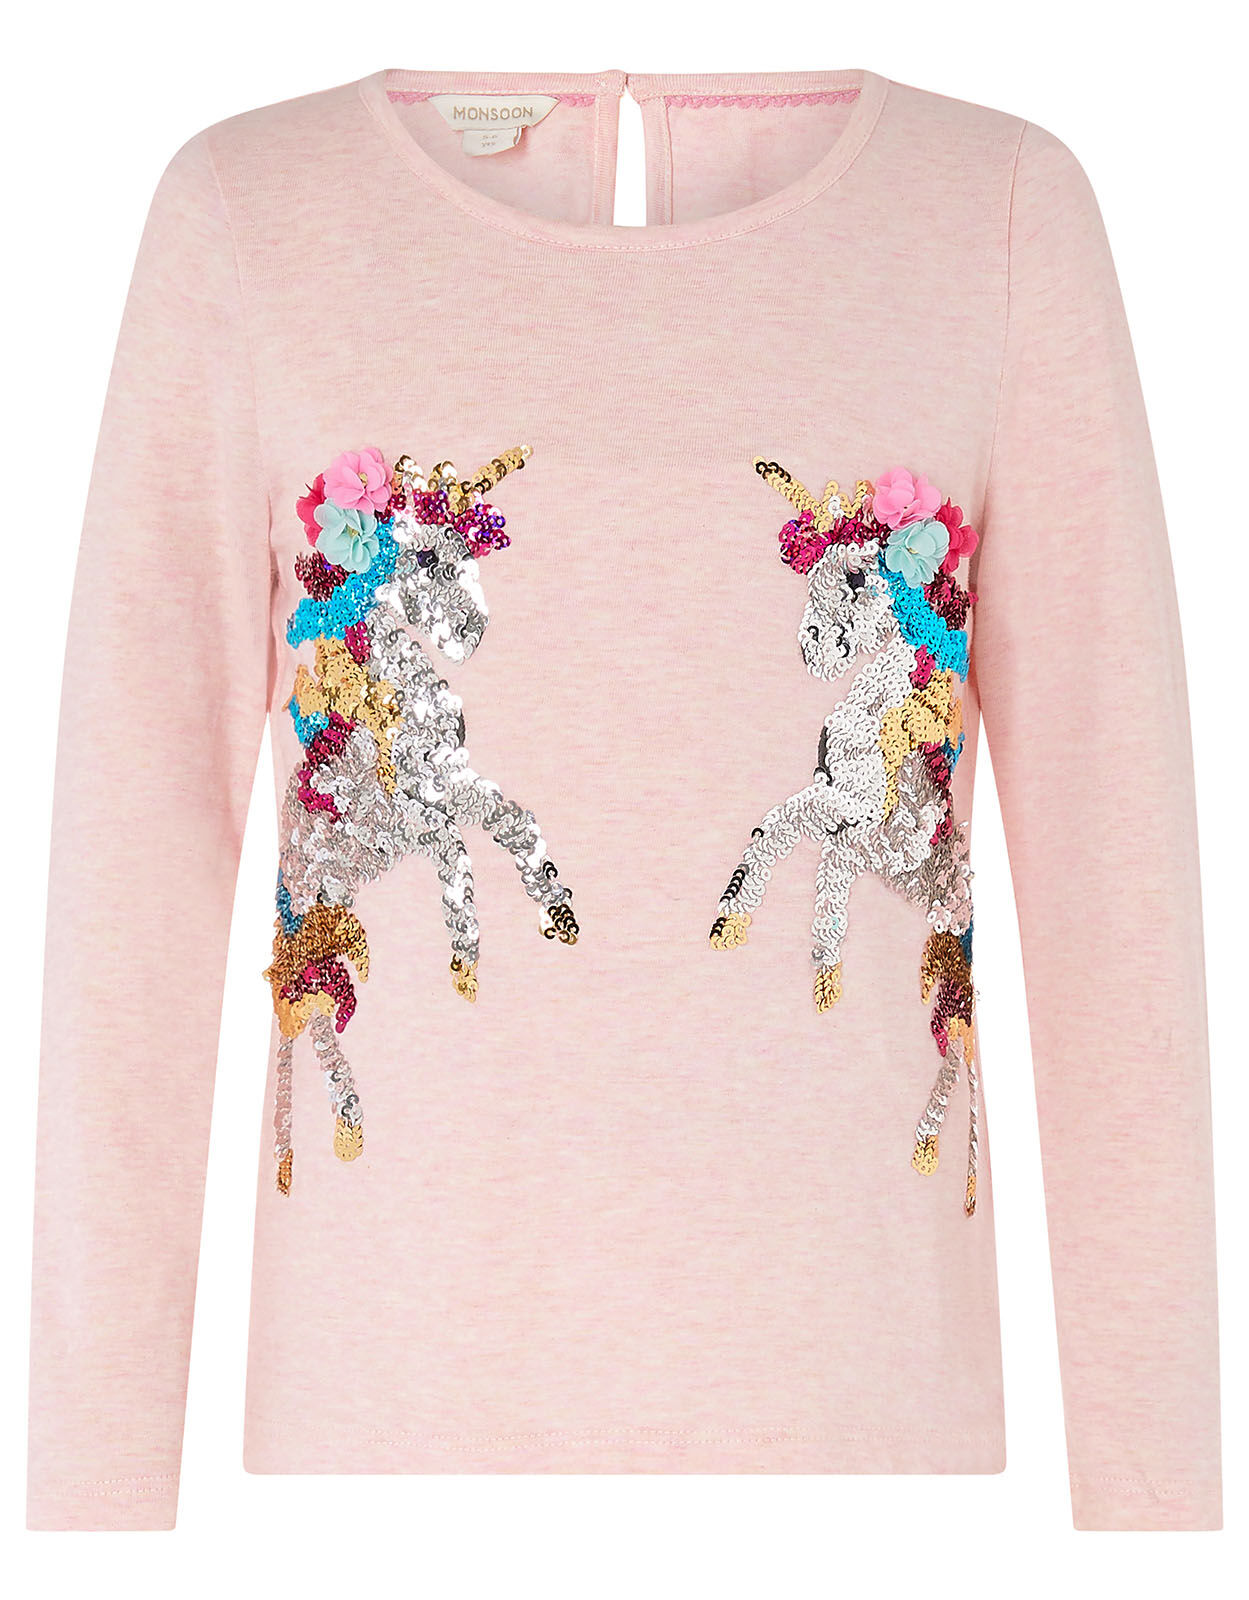 Girls Emoji Emoticons Unicorn FACE TEE Tops Fur Fluffy Sequin Tunic New Age 3-10 Years